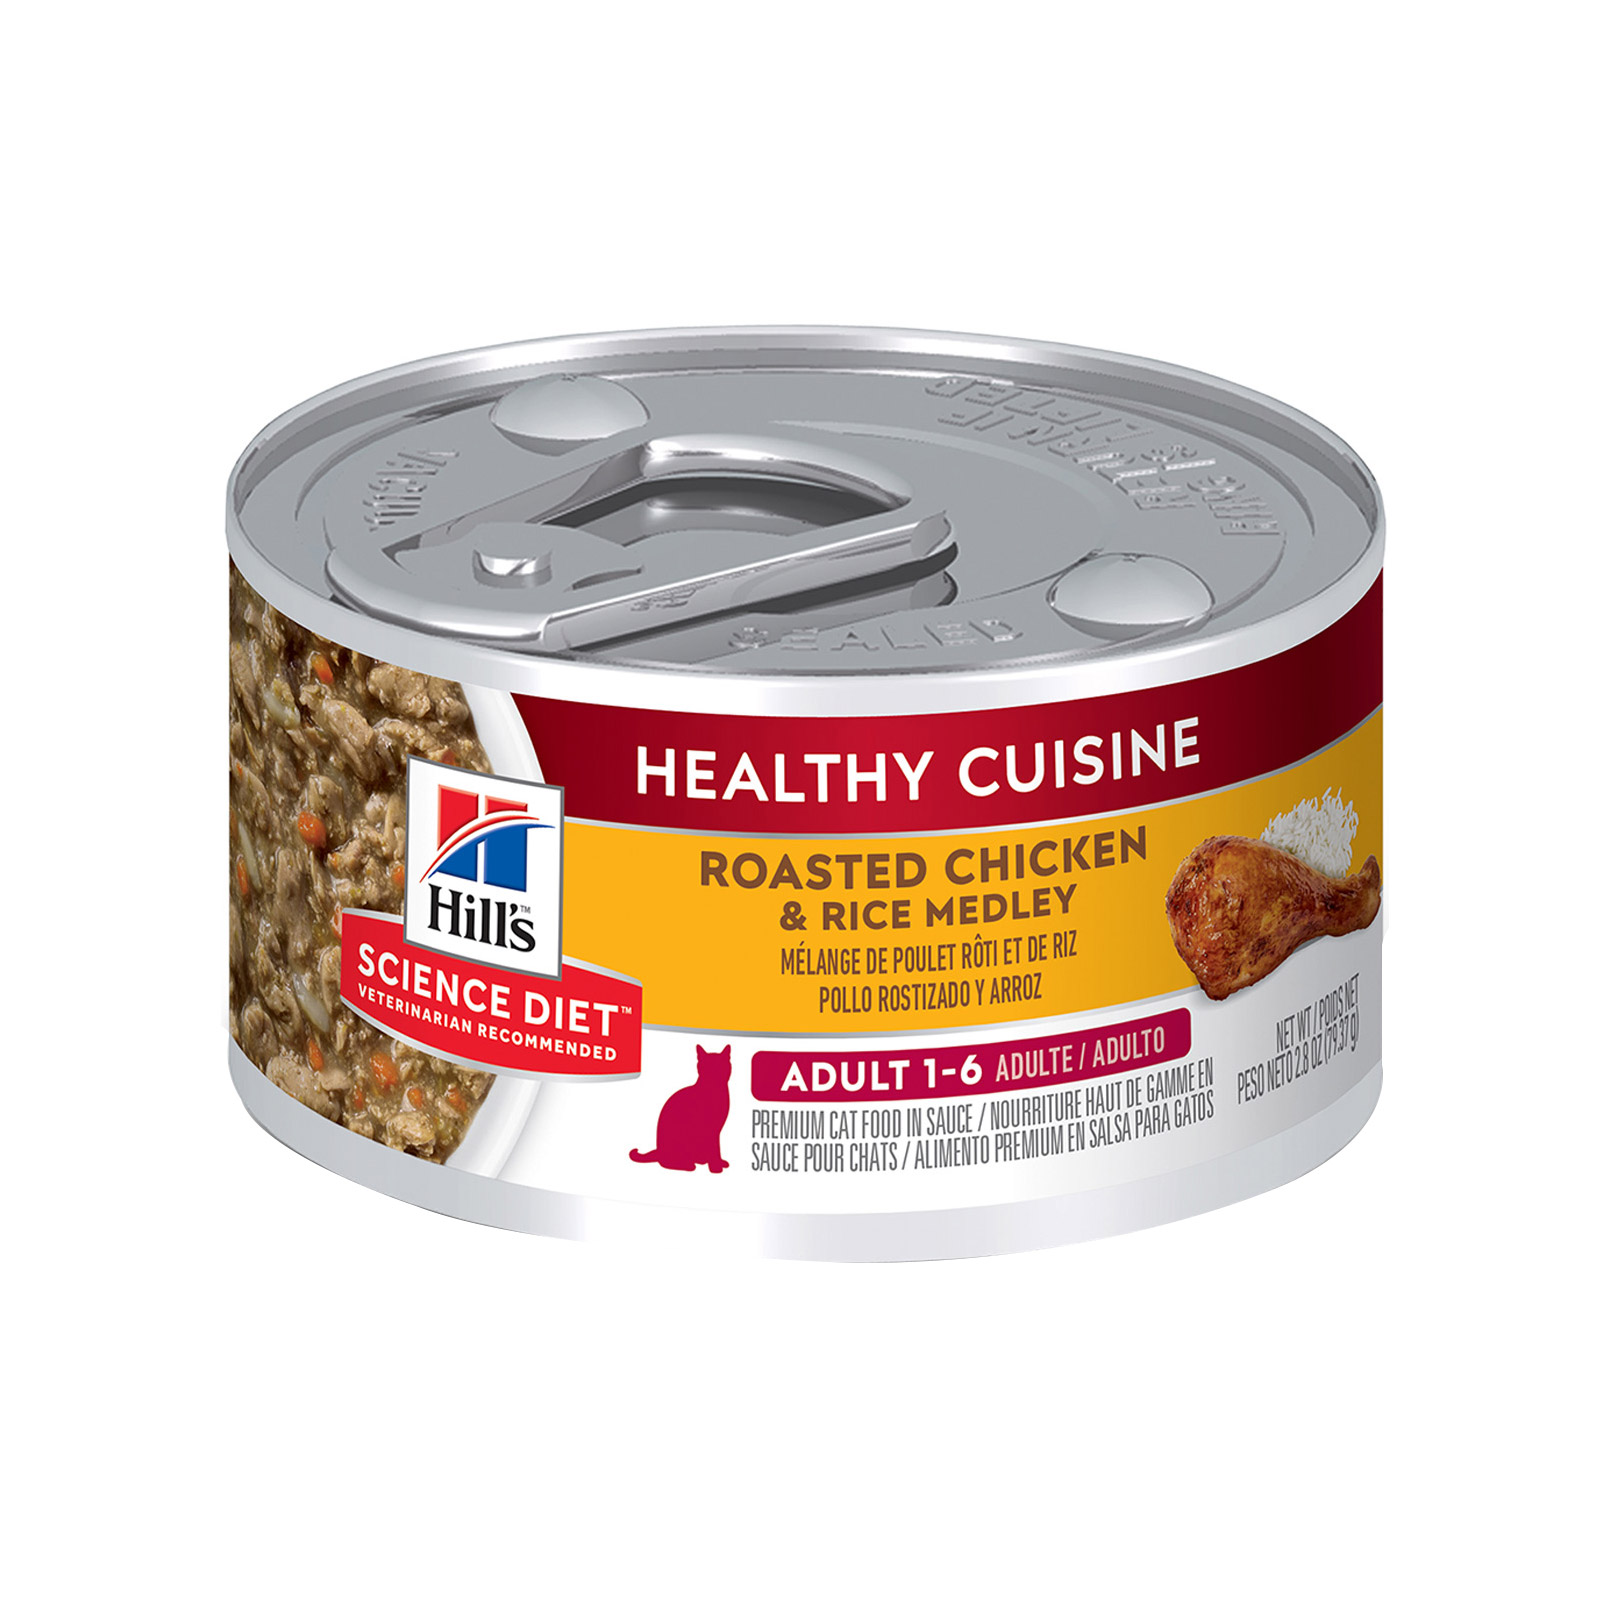 Hill’s Science Diet Adult Healthy Cuisine Roasted Chicken & Rice Medley Canned Cat Food for Food